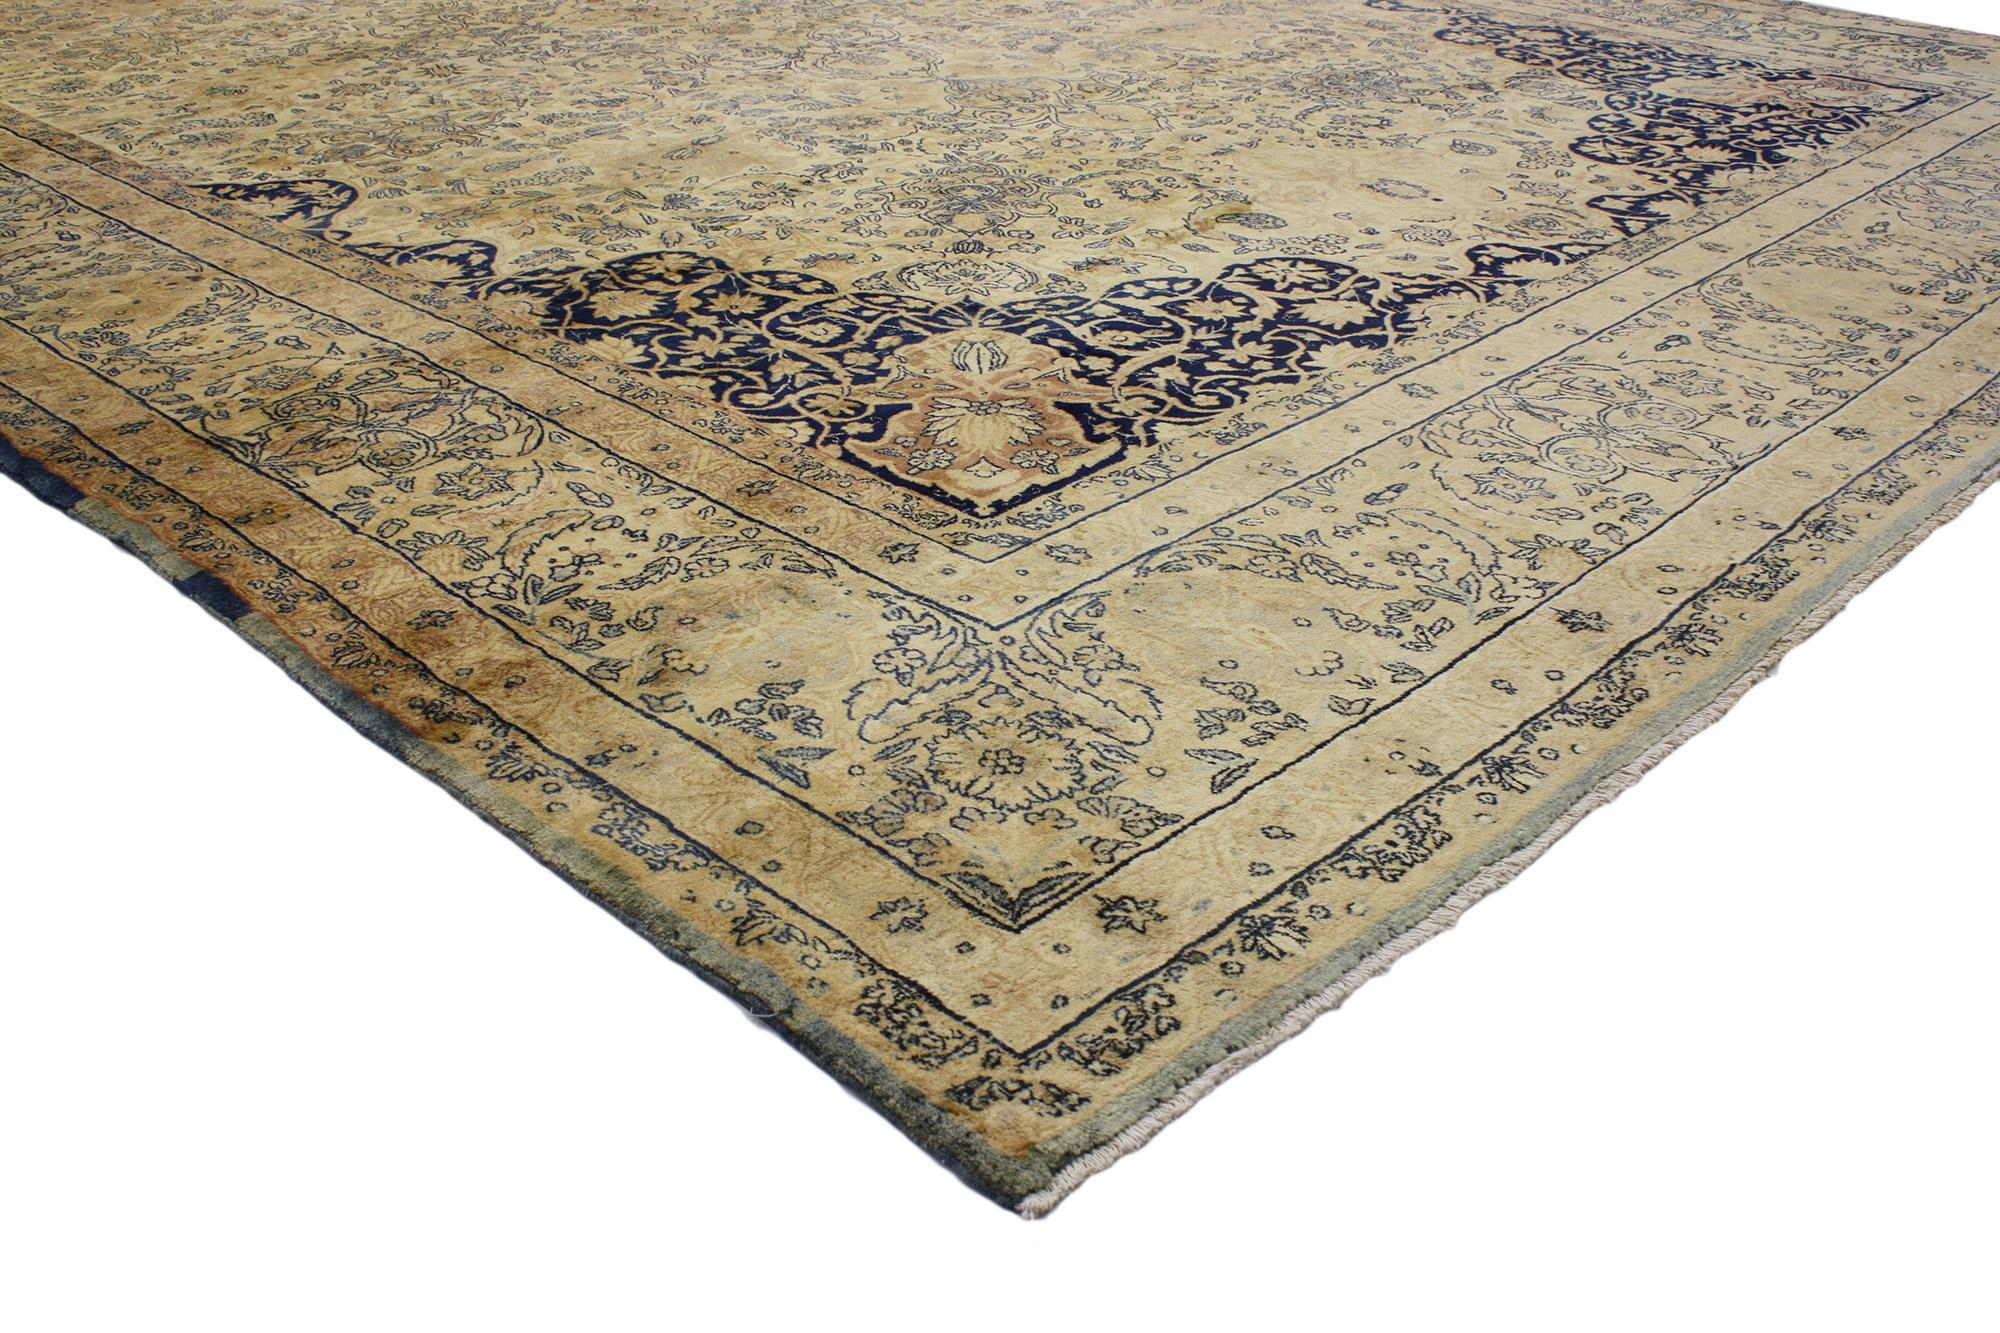 74229 Antique Persian Kerman Rug, 11'00 x 16'10. Kerman rugs originate from the city of Kerman, nestled in south-central Iran. Renowned as one of Iran's key weaving centers, this city boasts a heritage steeped in the art of crafting exquisite